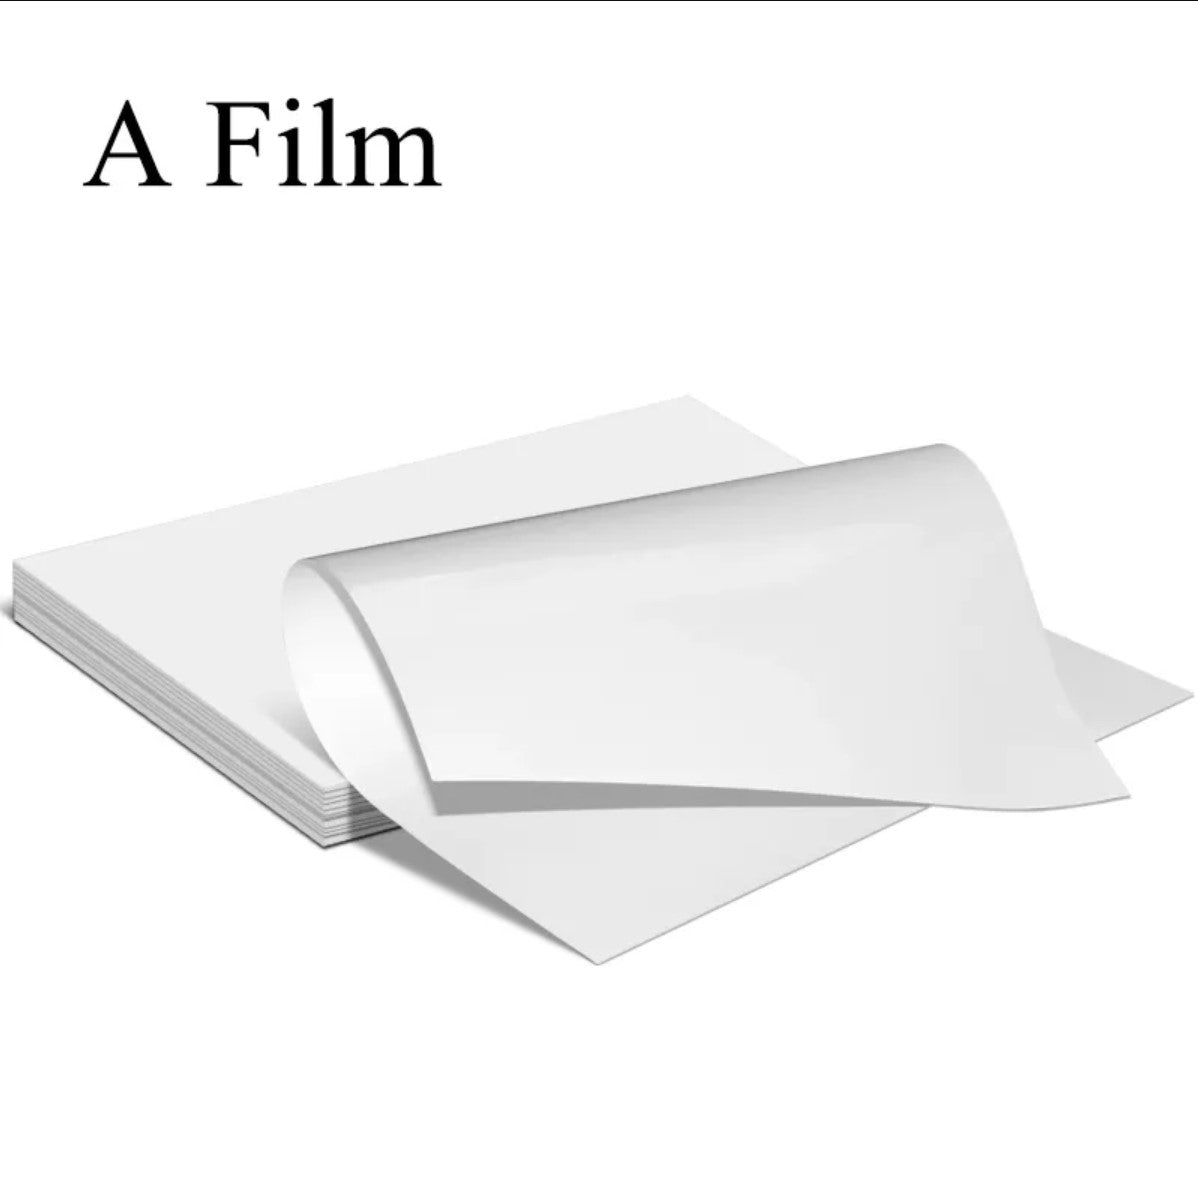 UV DTF film (A+B) for UV-DTF applications up to DIN A3+ format